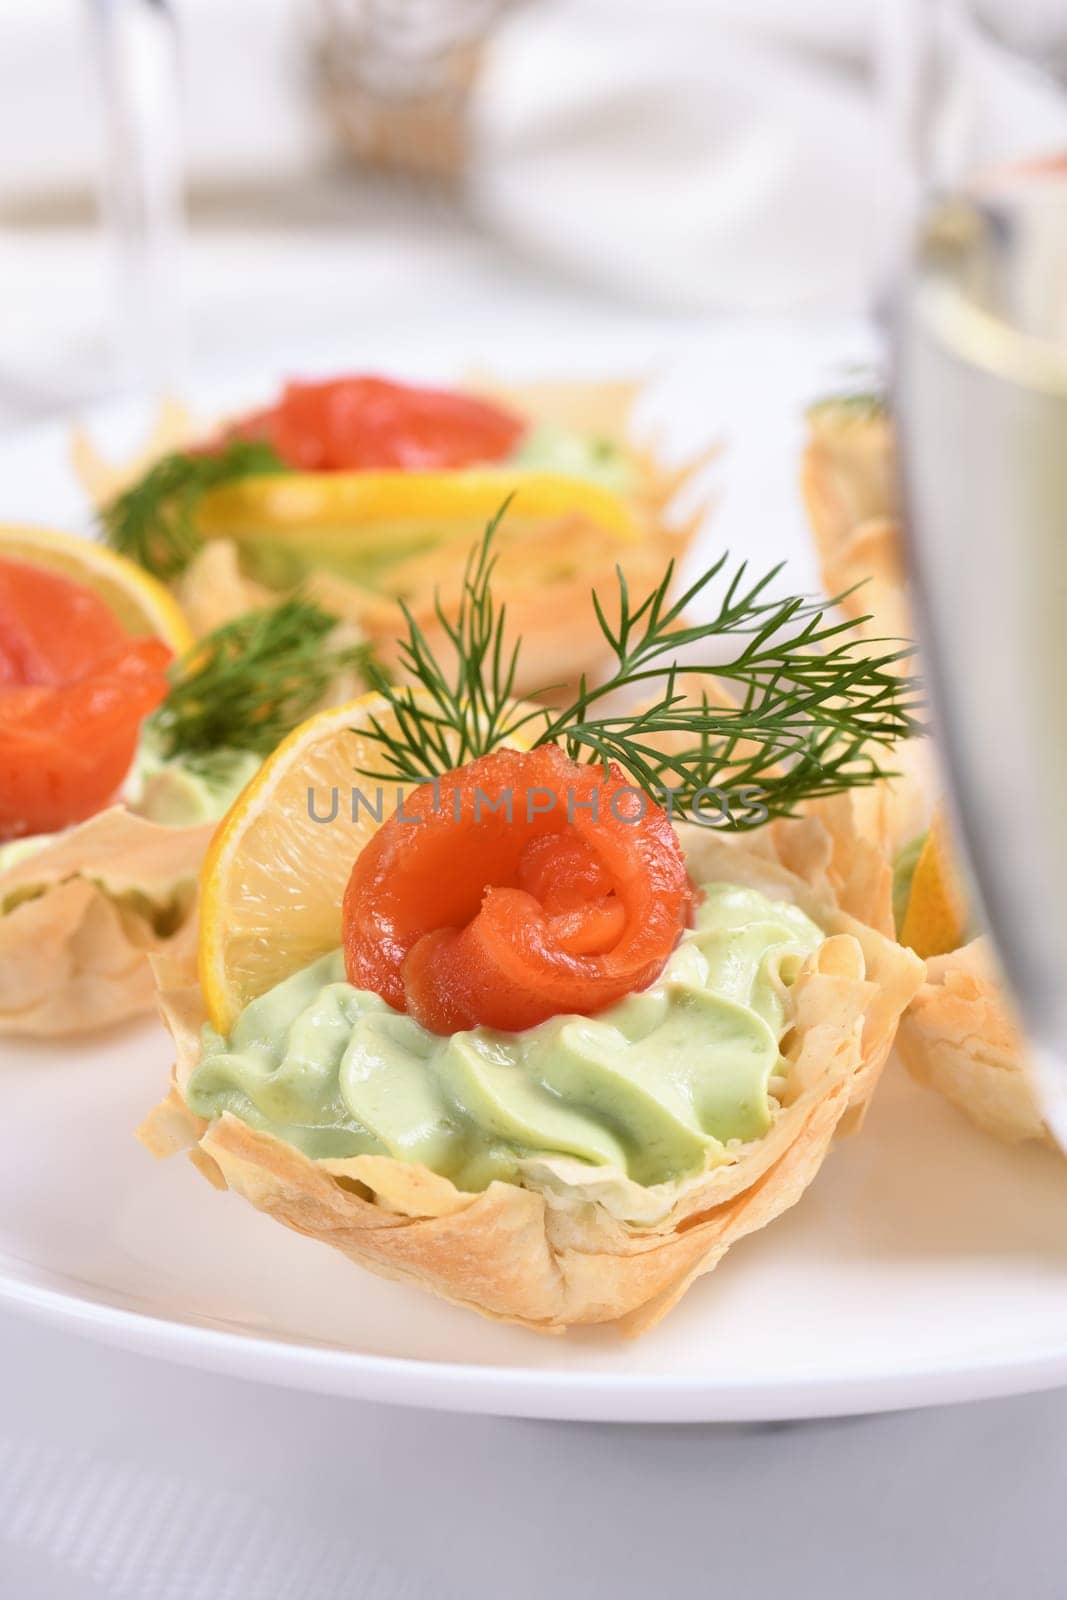  Filo dough baskets with avocado pate and salmon by Apolonia